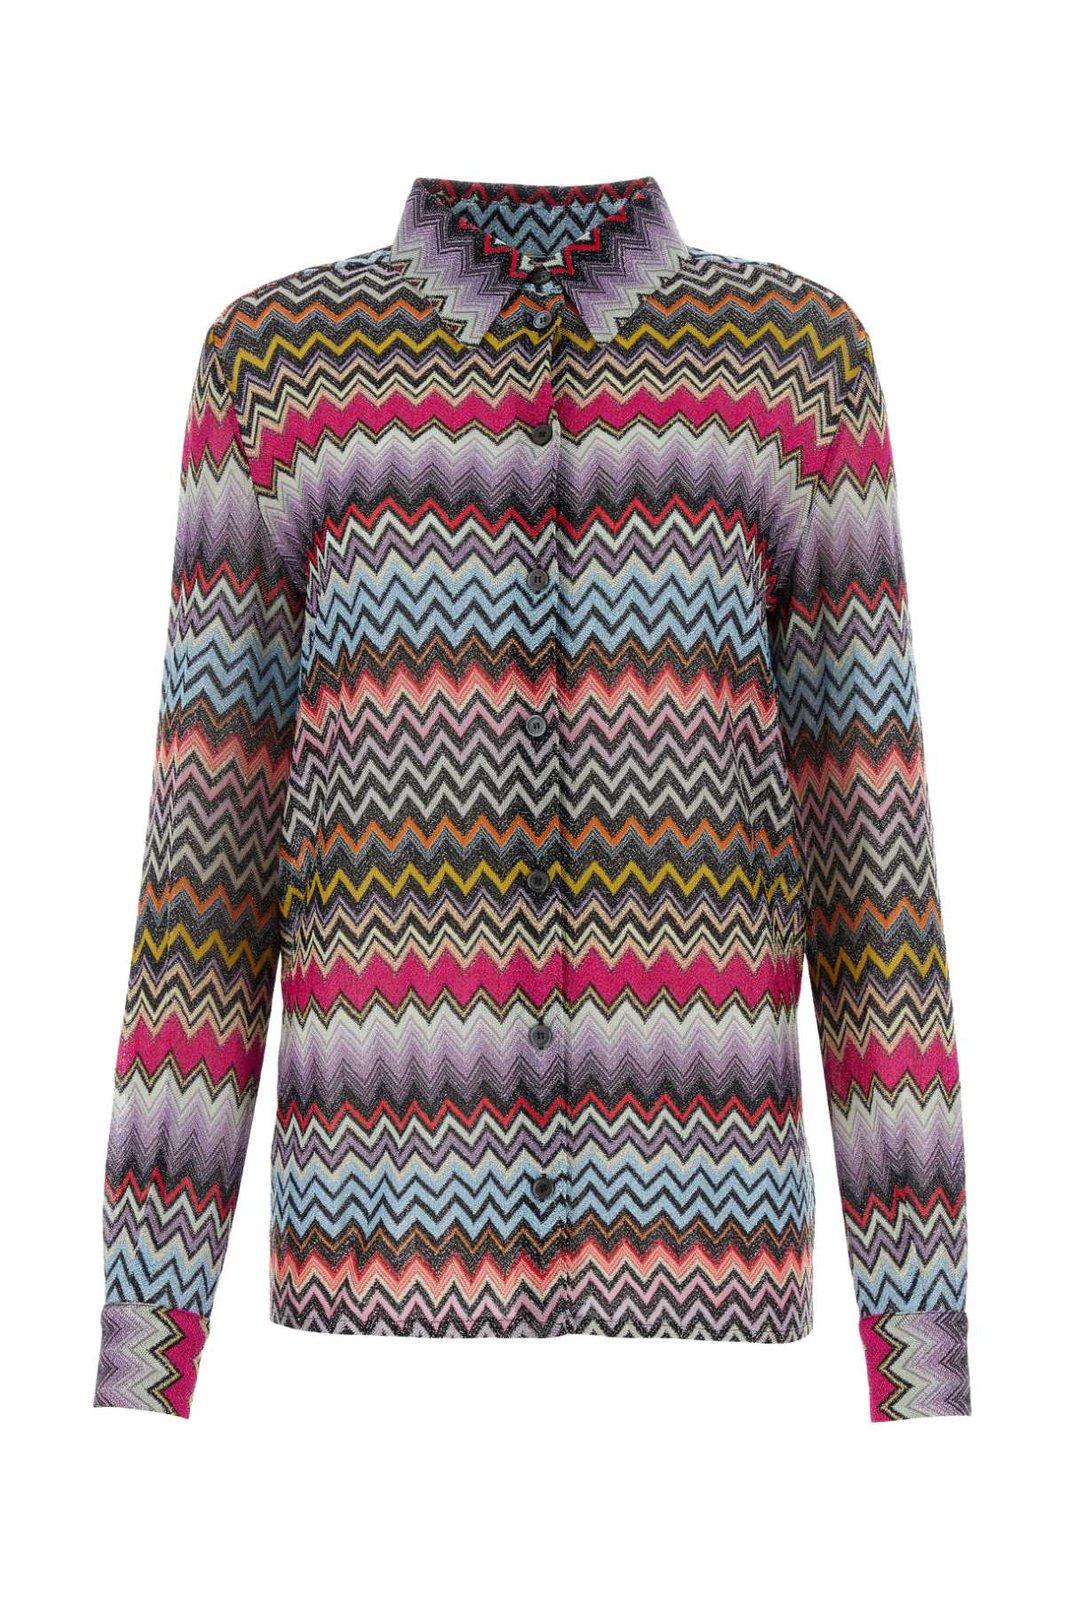 Shop Missoni Patternede Embroidered Button-up Long-sleeved Shirt In Multicolor Black Bas